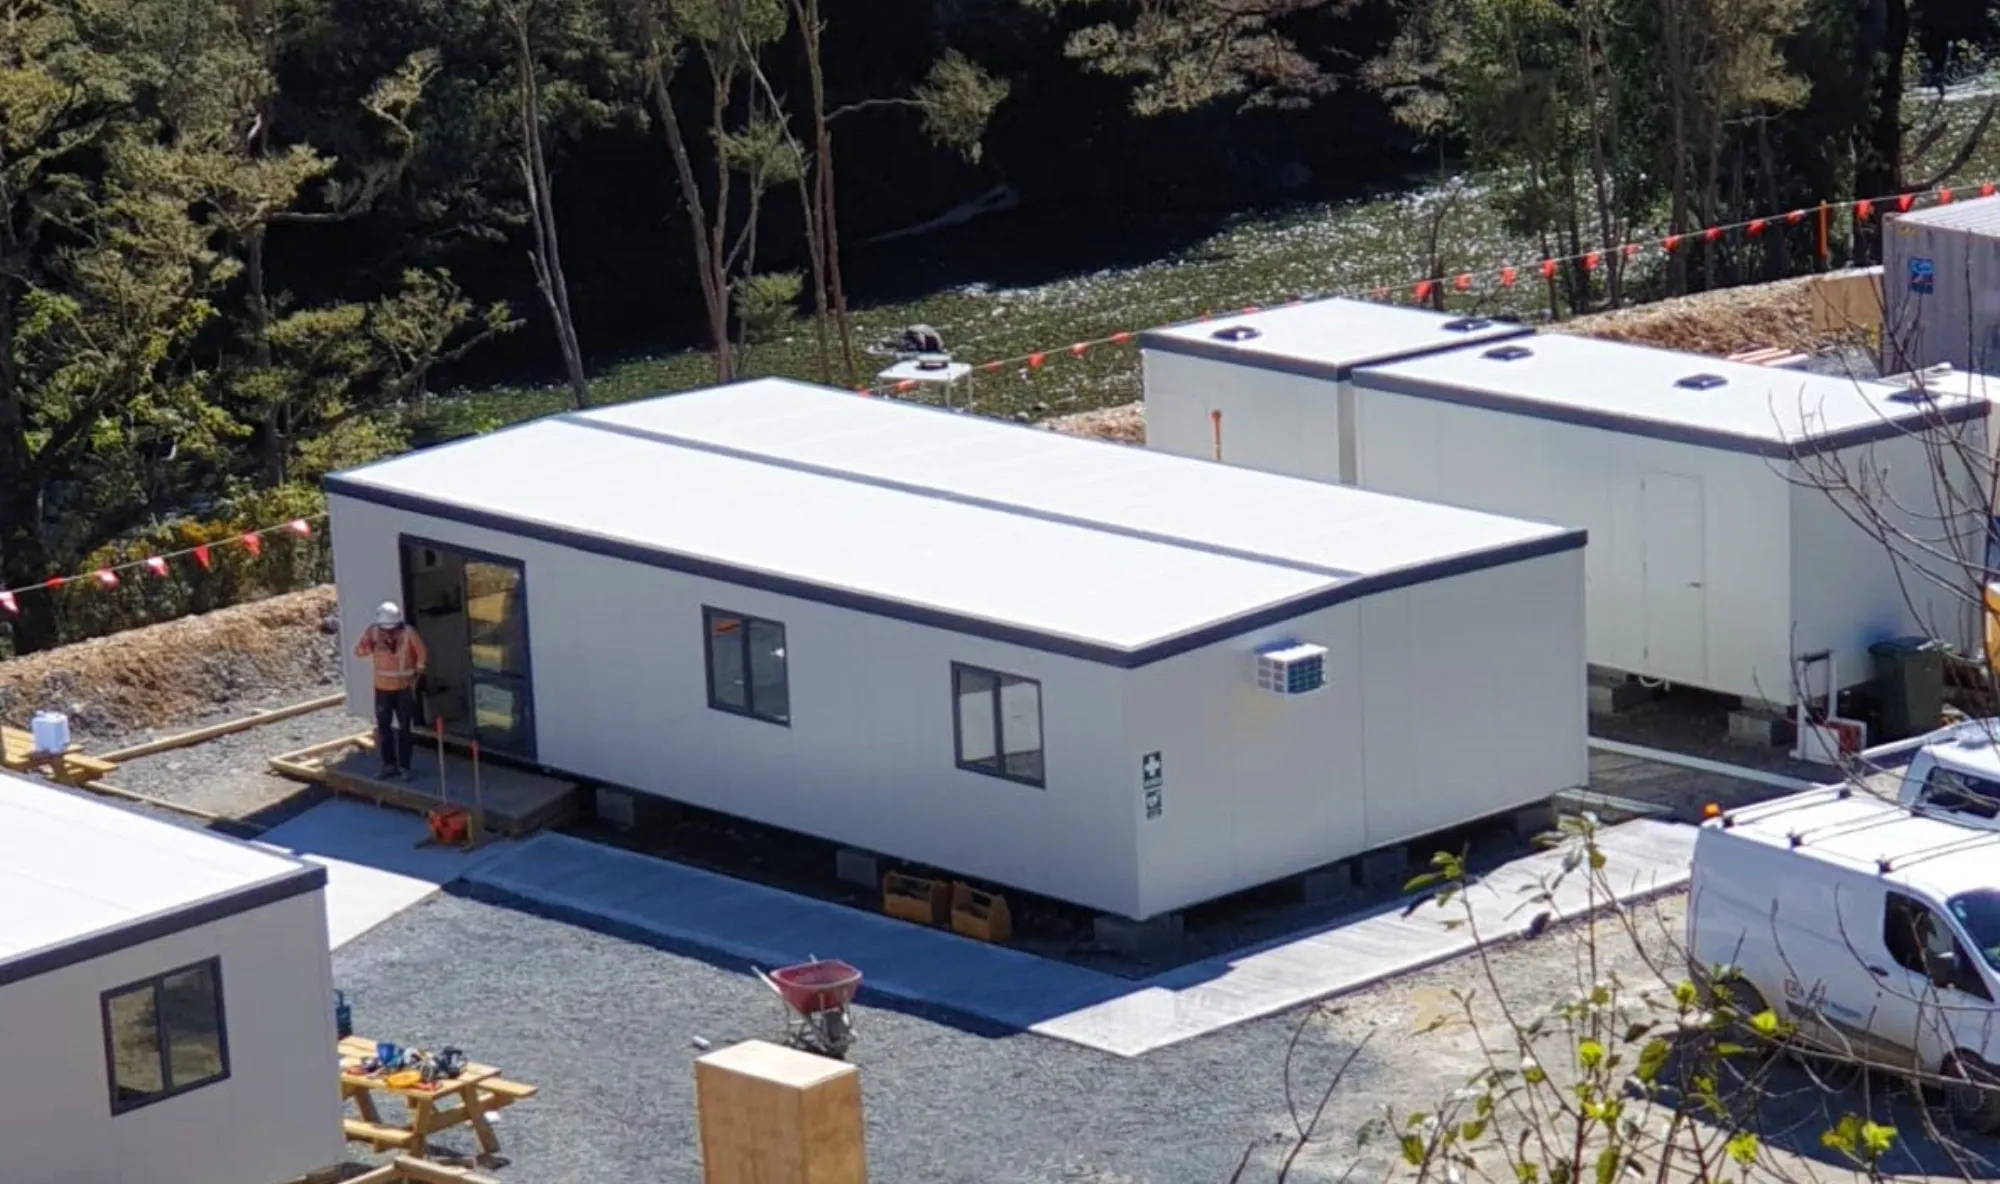 Waimea Dam Moveable buildings on site including lunchrooms, offices, meeting rooms, ablution blocks.